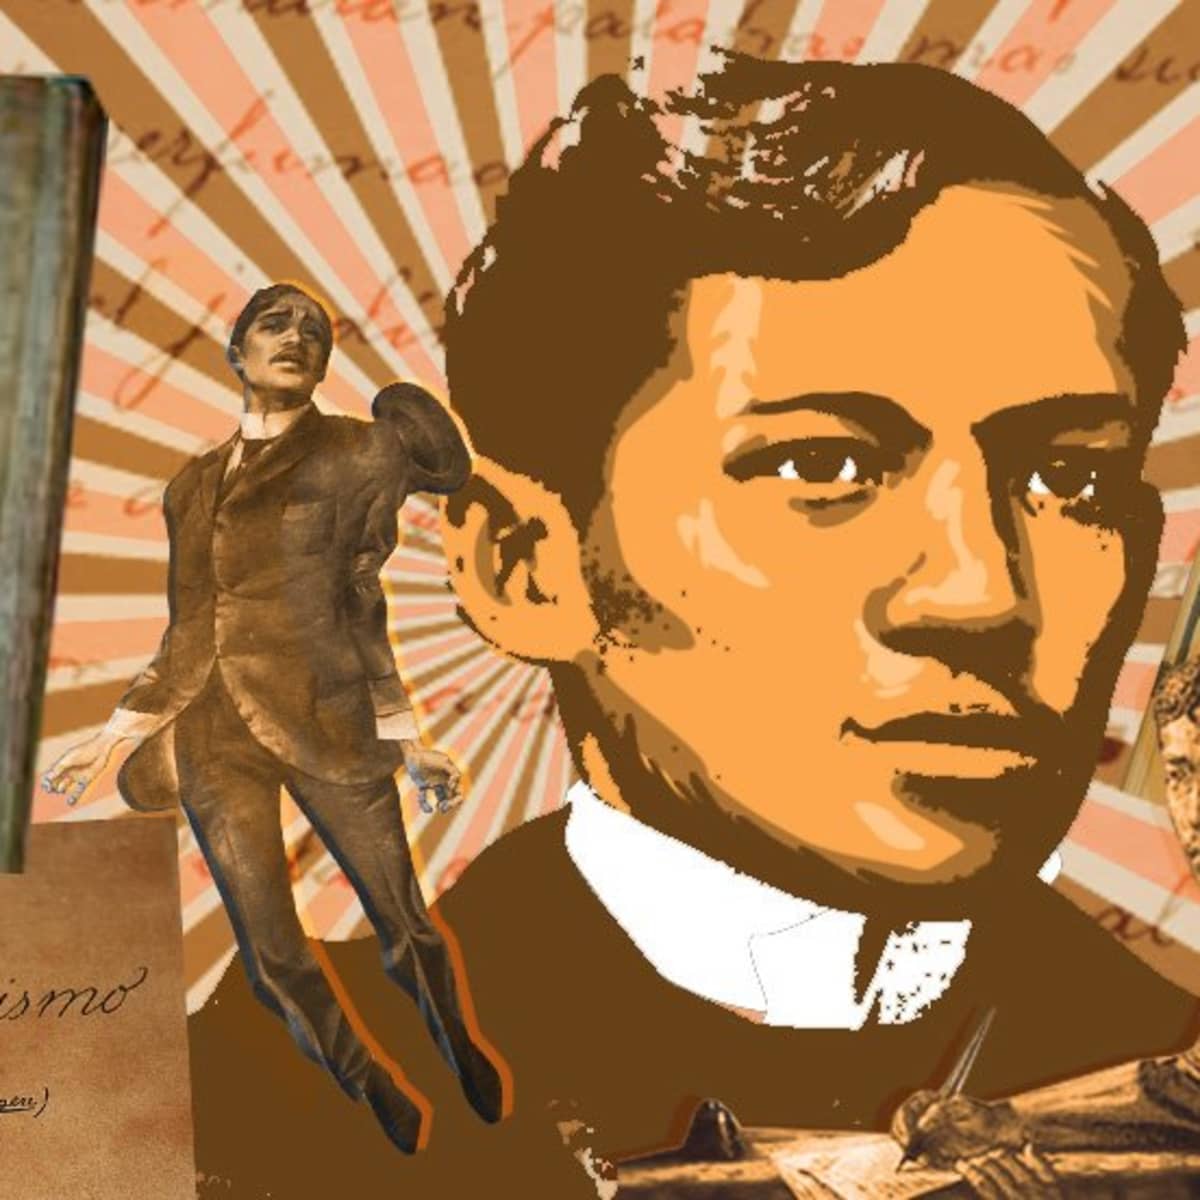 el filibusterismo characters and their roles